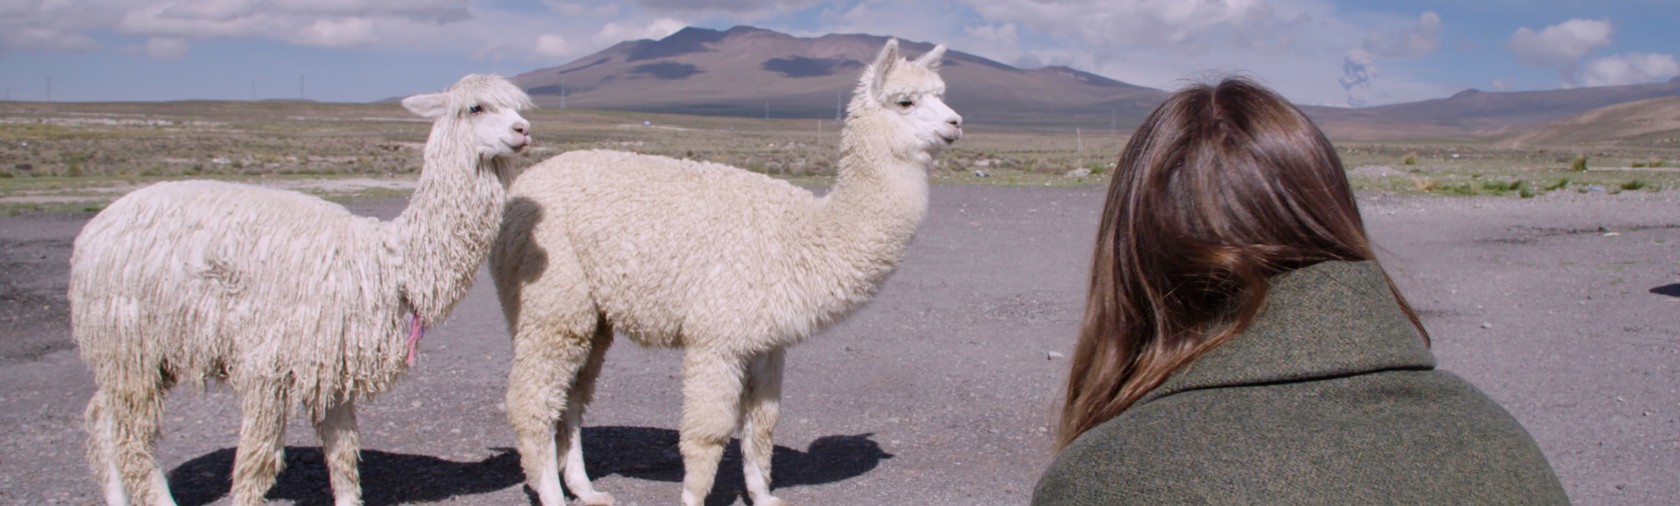 A person facing towards two alpacas with mountains behind them